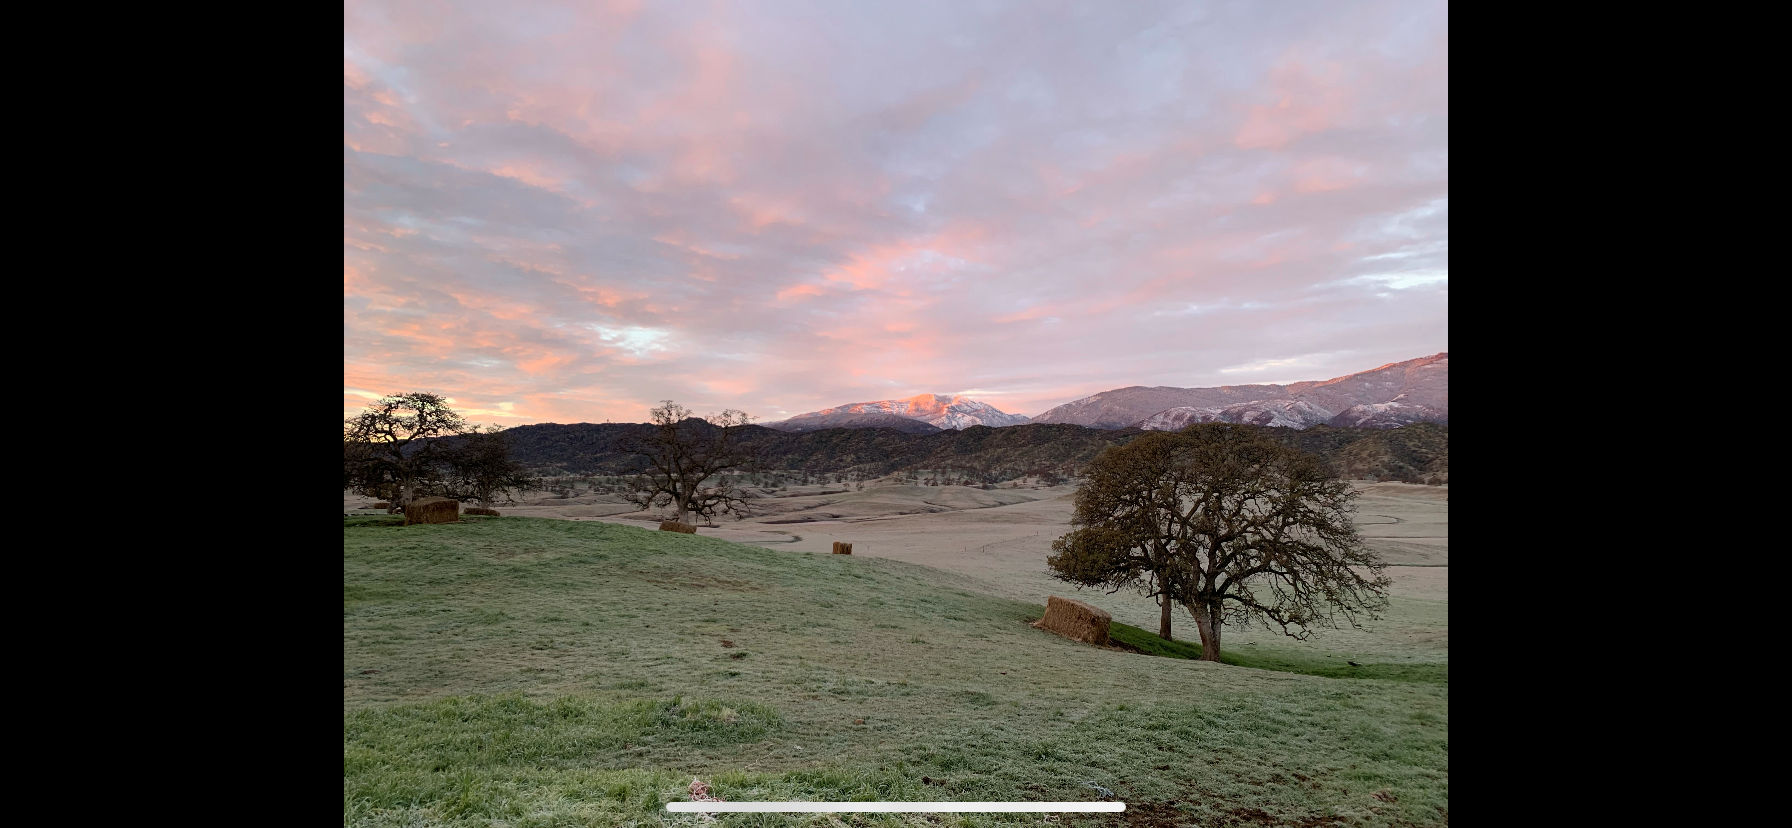 Photo By: Tristen Groteguth March 17, 2022 - Sunrise over a frost covered hilly field with snow-capped mountains in background